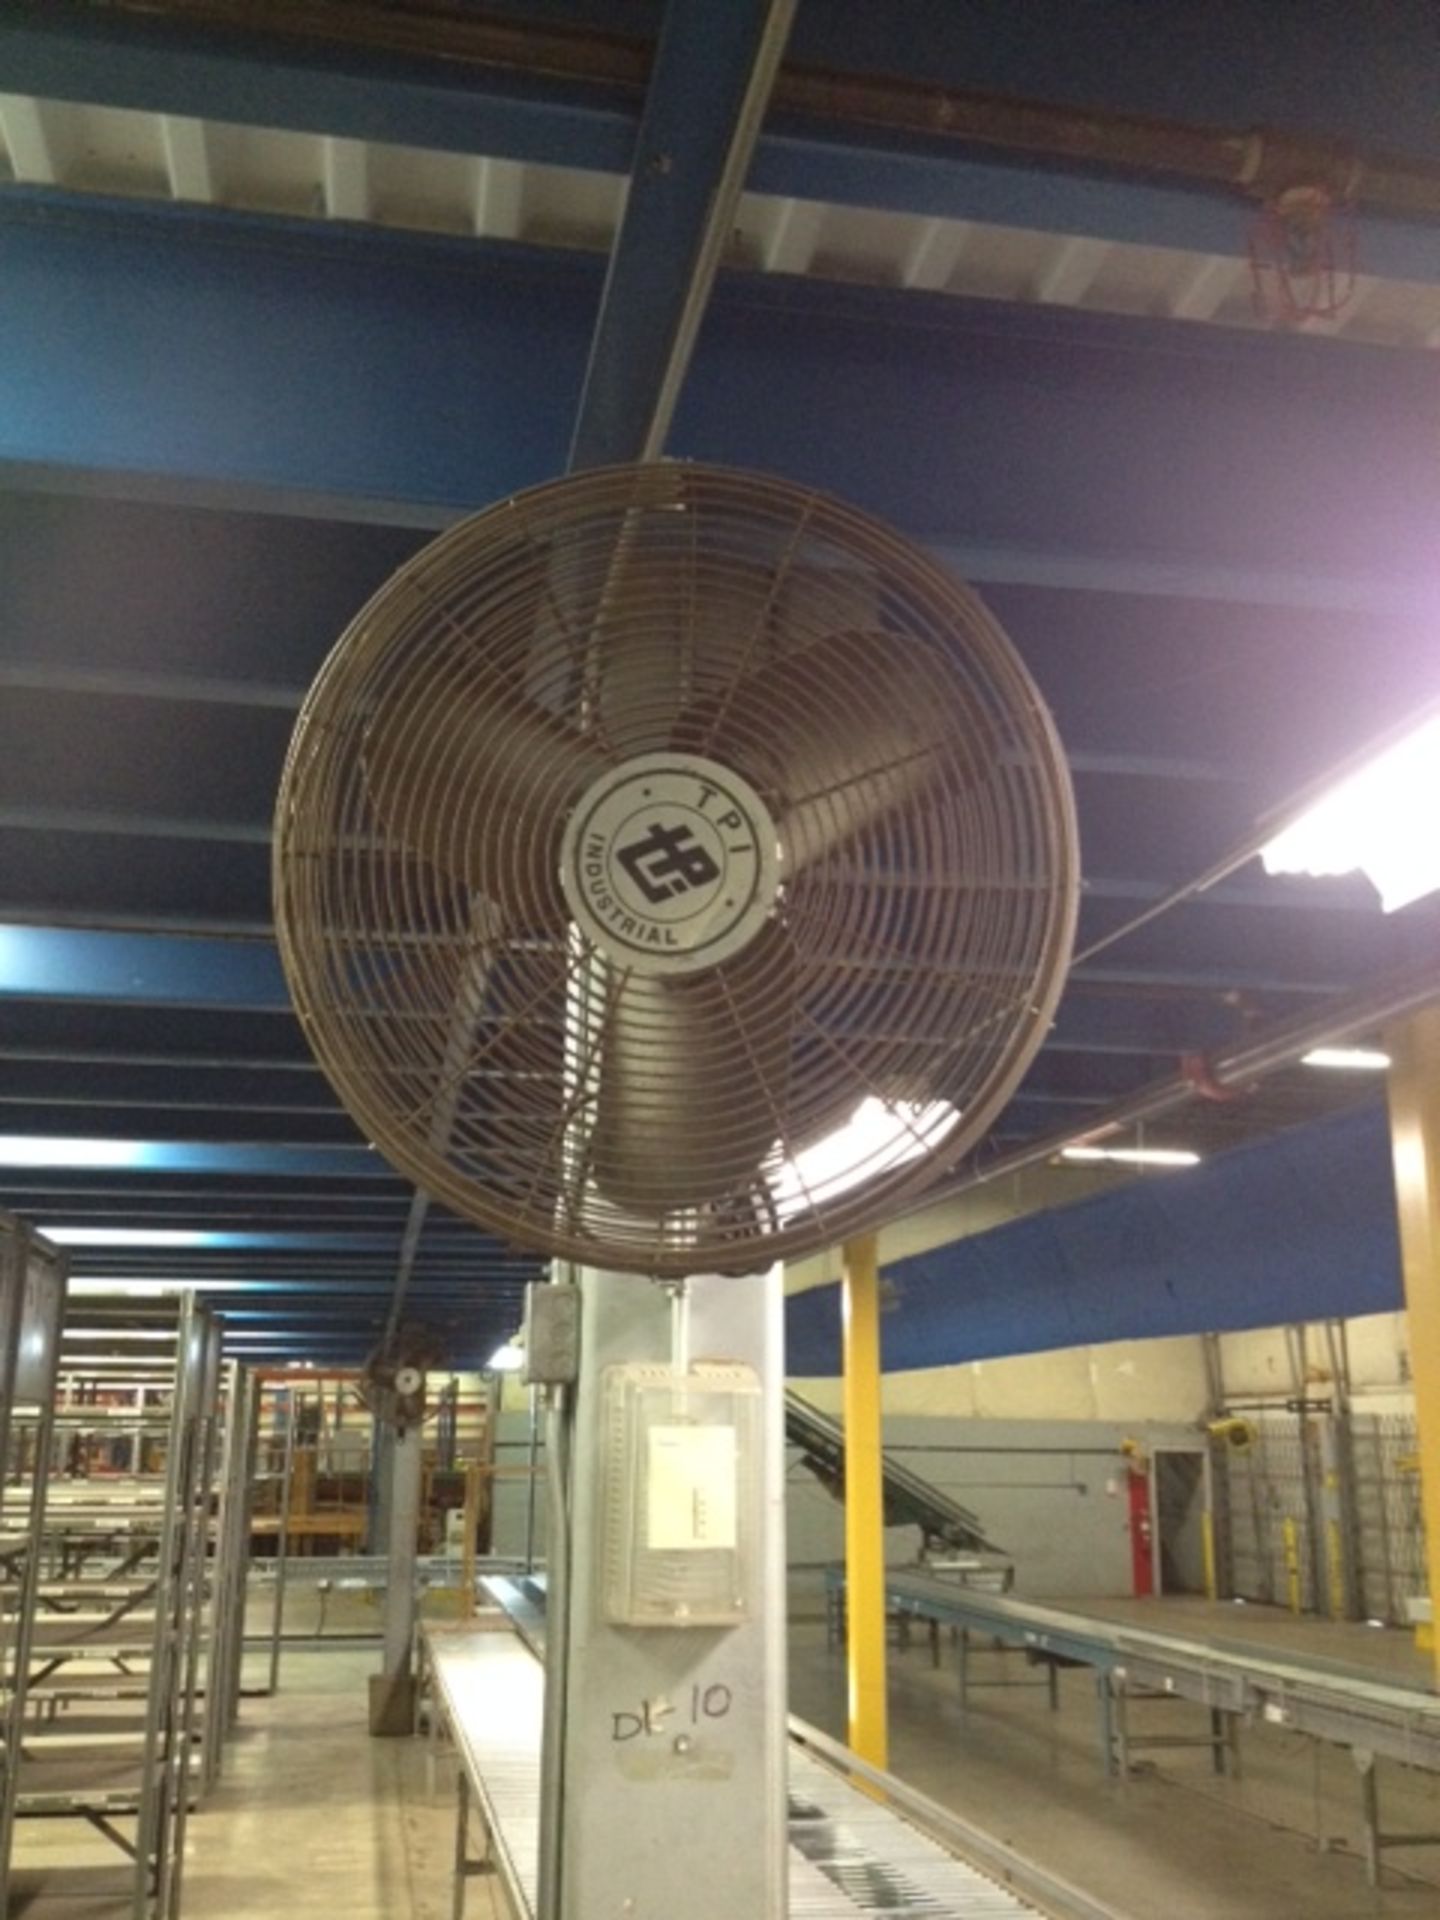 INDUSTRIAL FAN 22" - 28" FIRST COME, FIRST SERVE